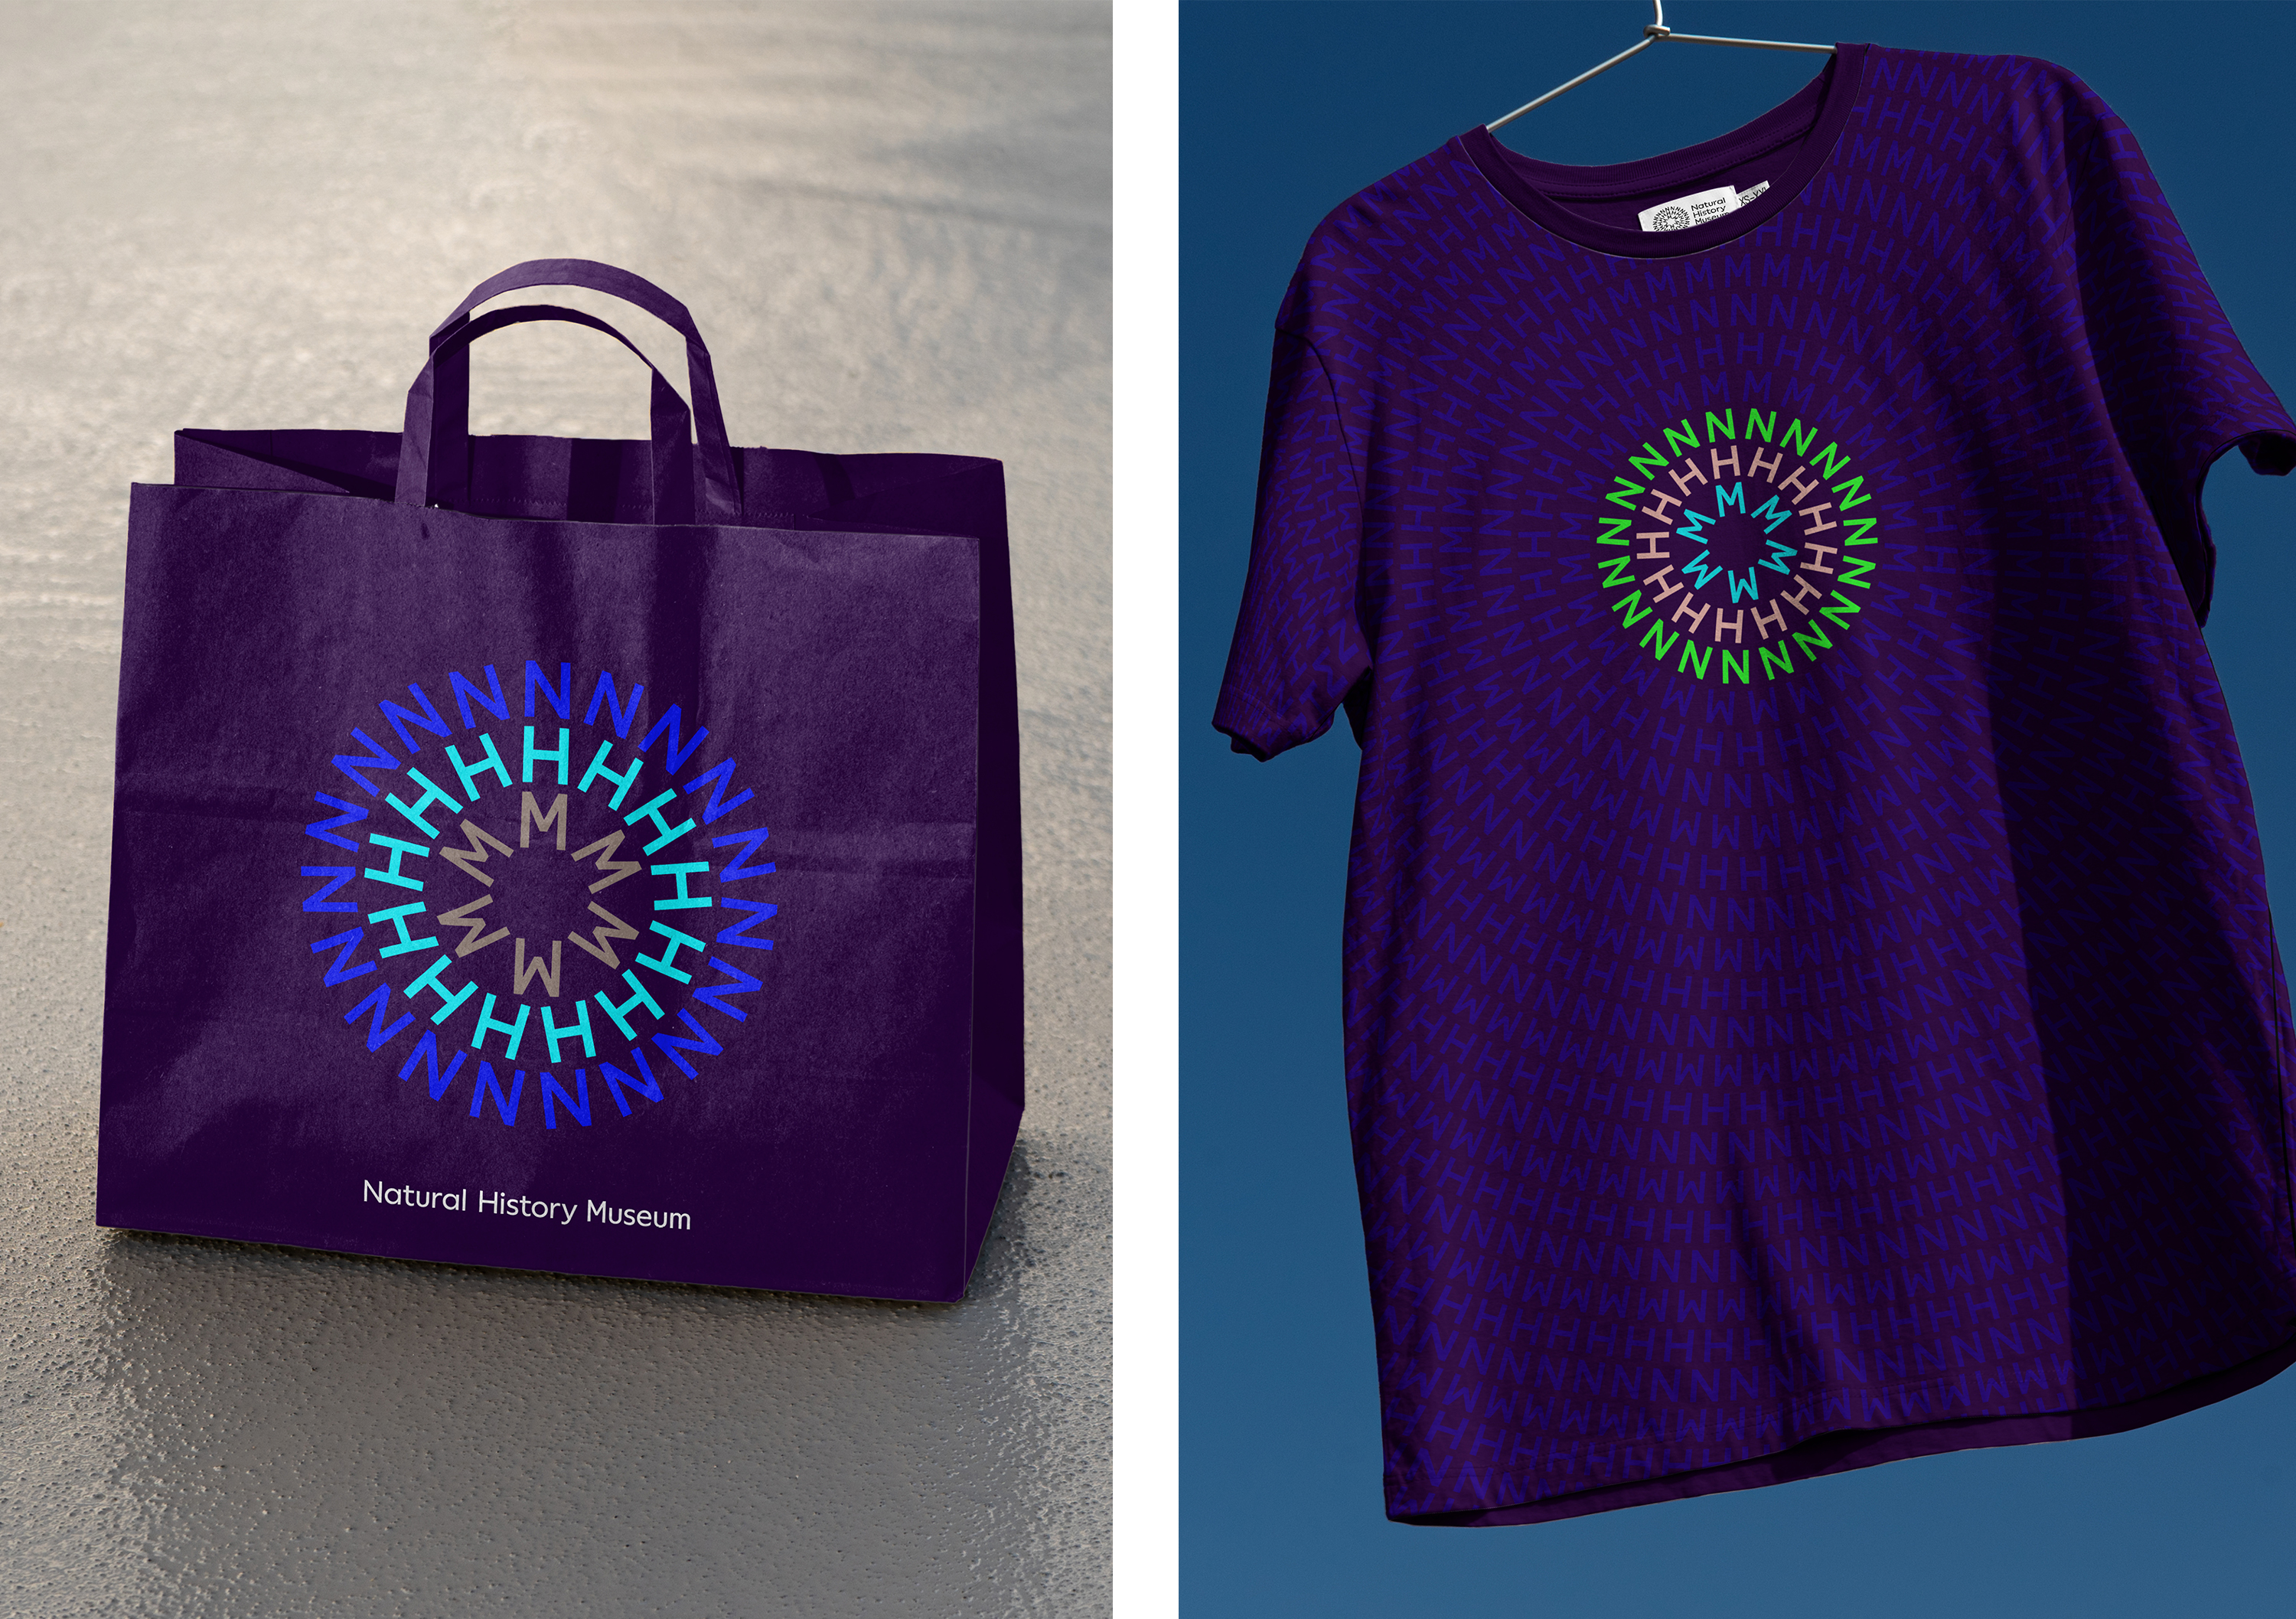 Logo branded canvas bag and t-shirt by Pentagram and Nomad for London's Natural History Museum